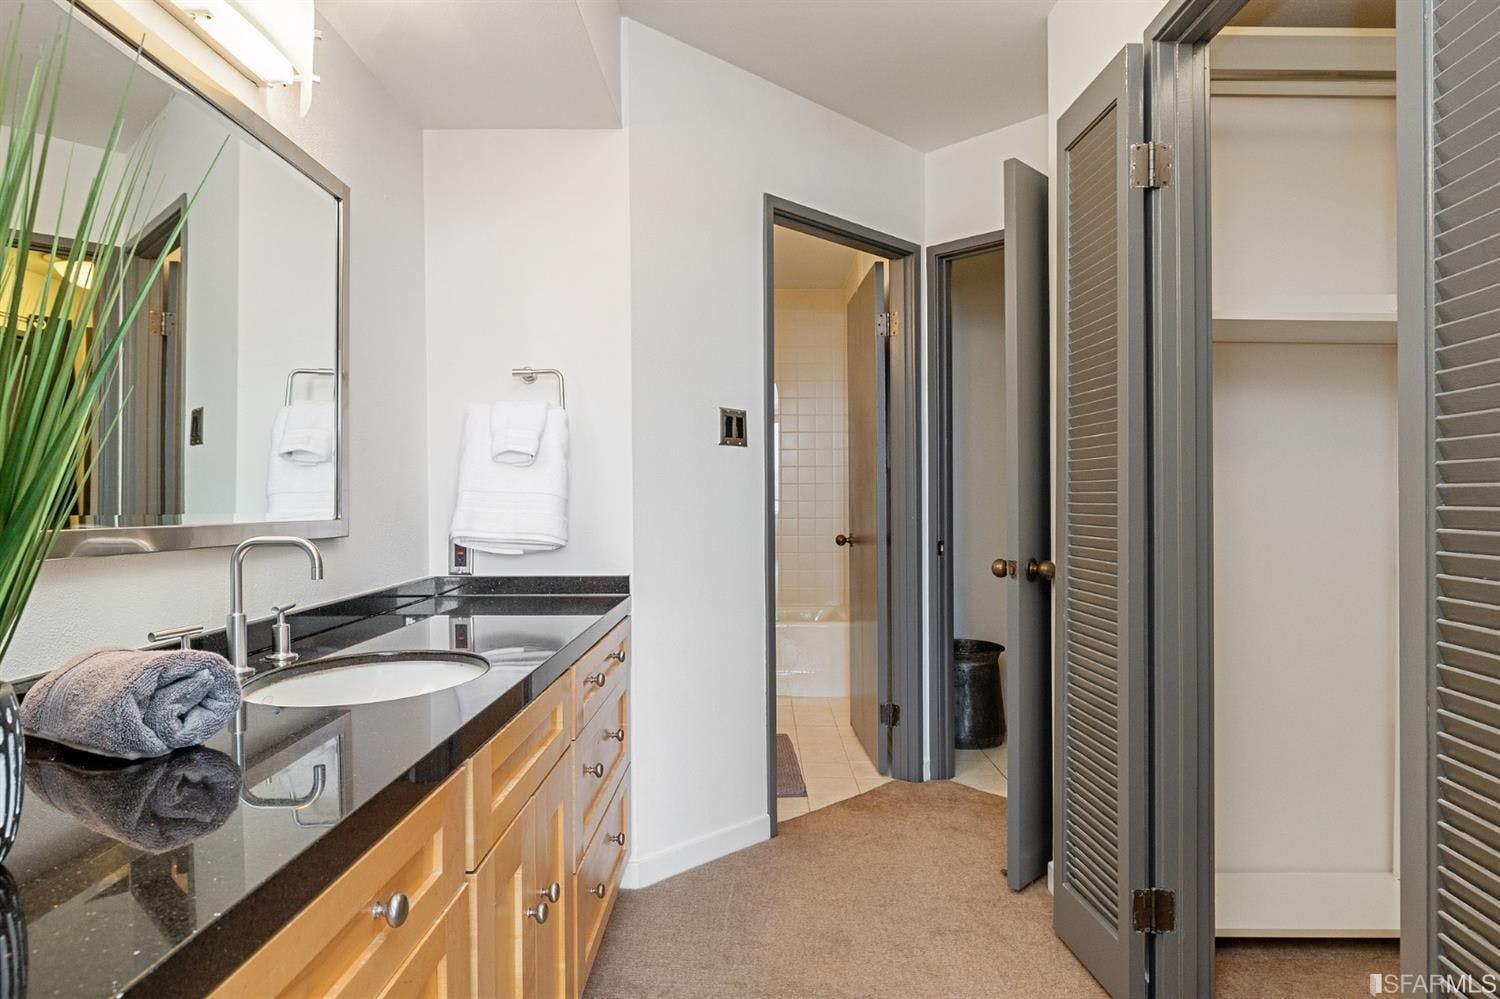 Bathrooms in 101 Lombard have shower-over-tub designs, as well as pristine countertop and walking space. 